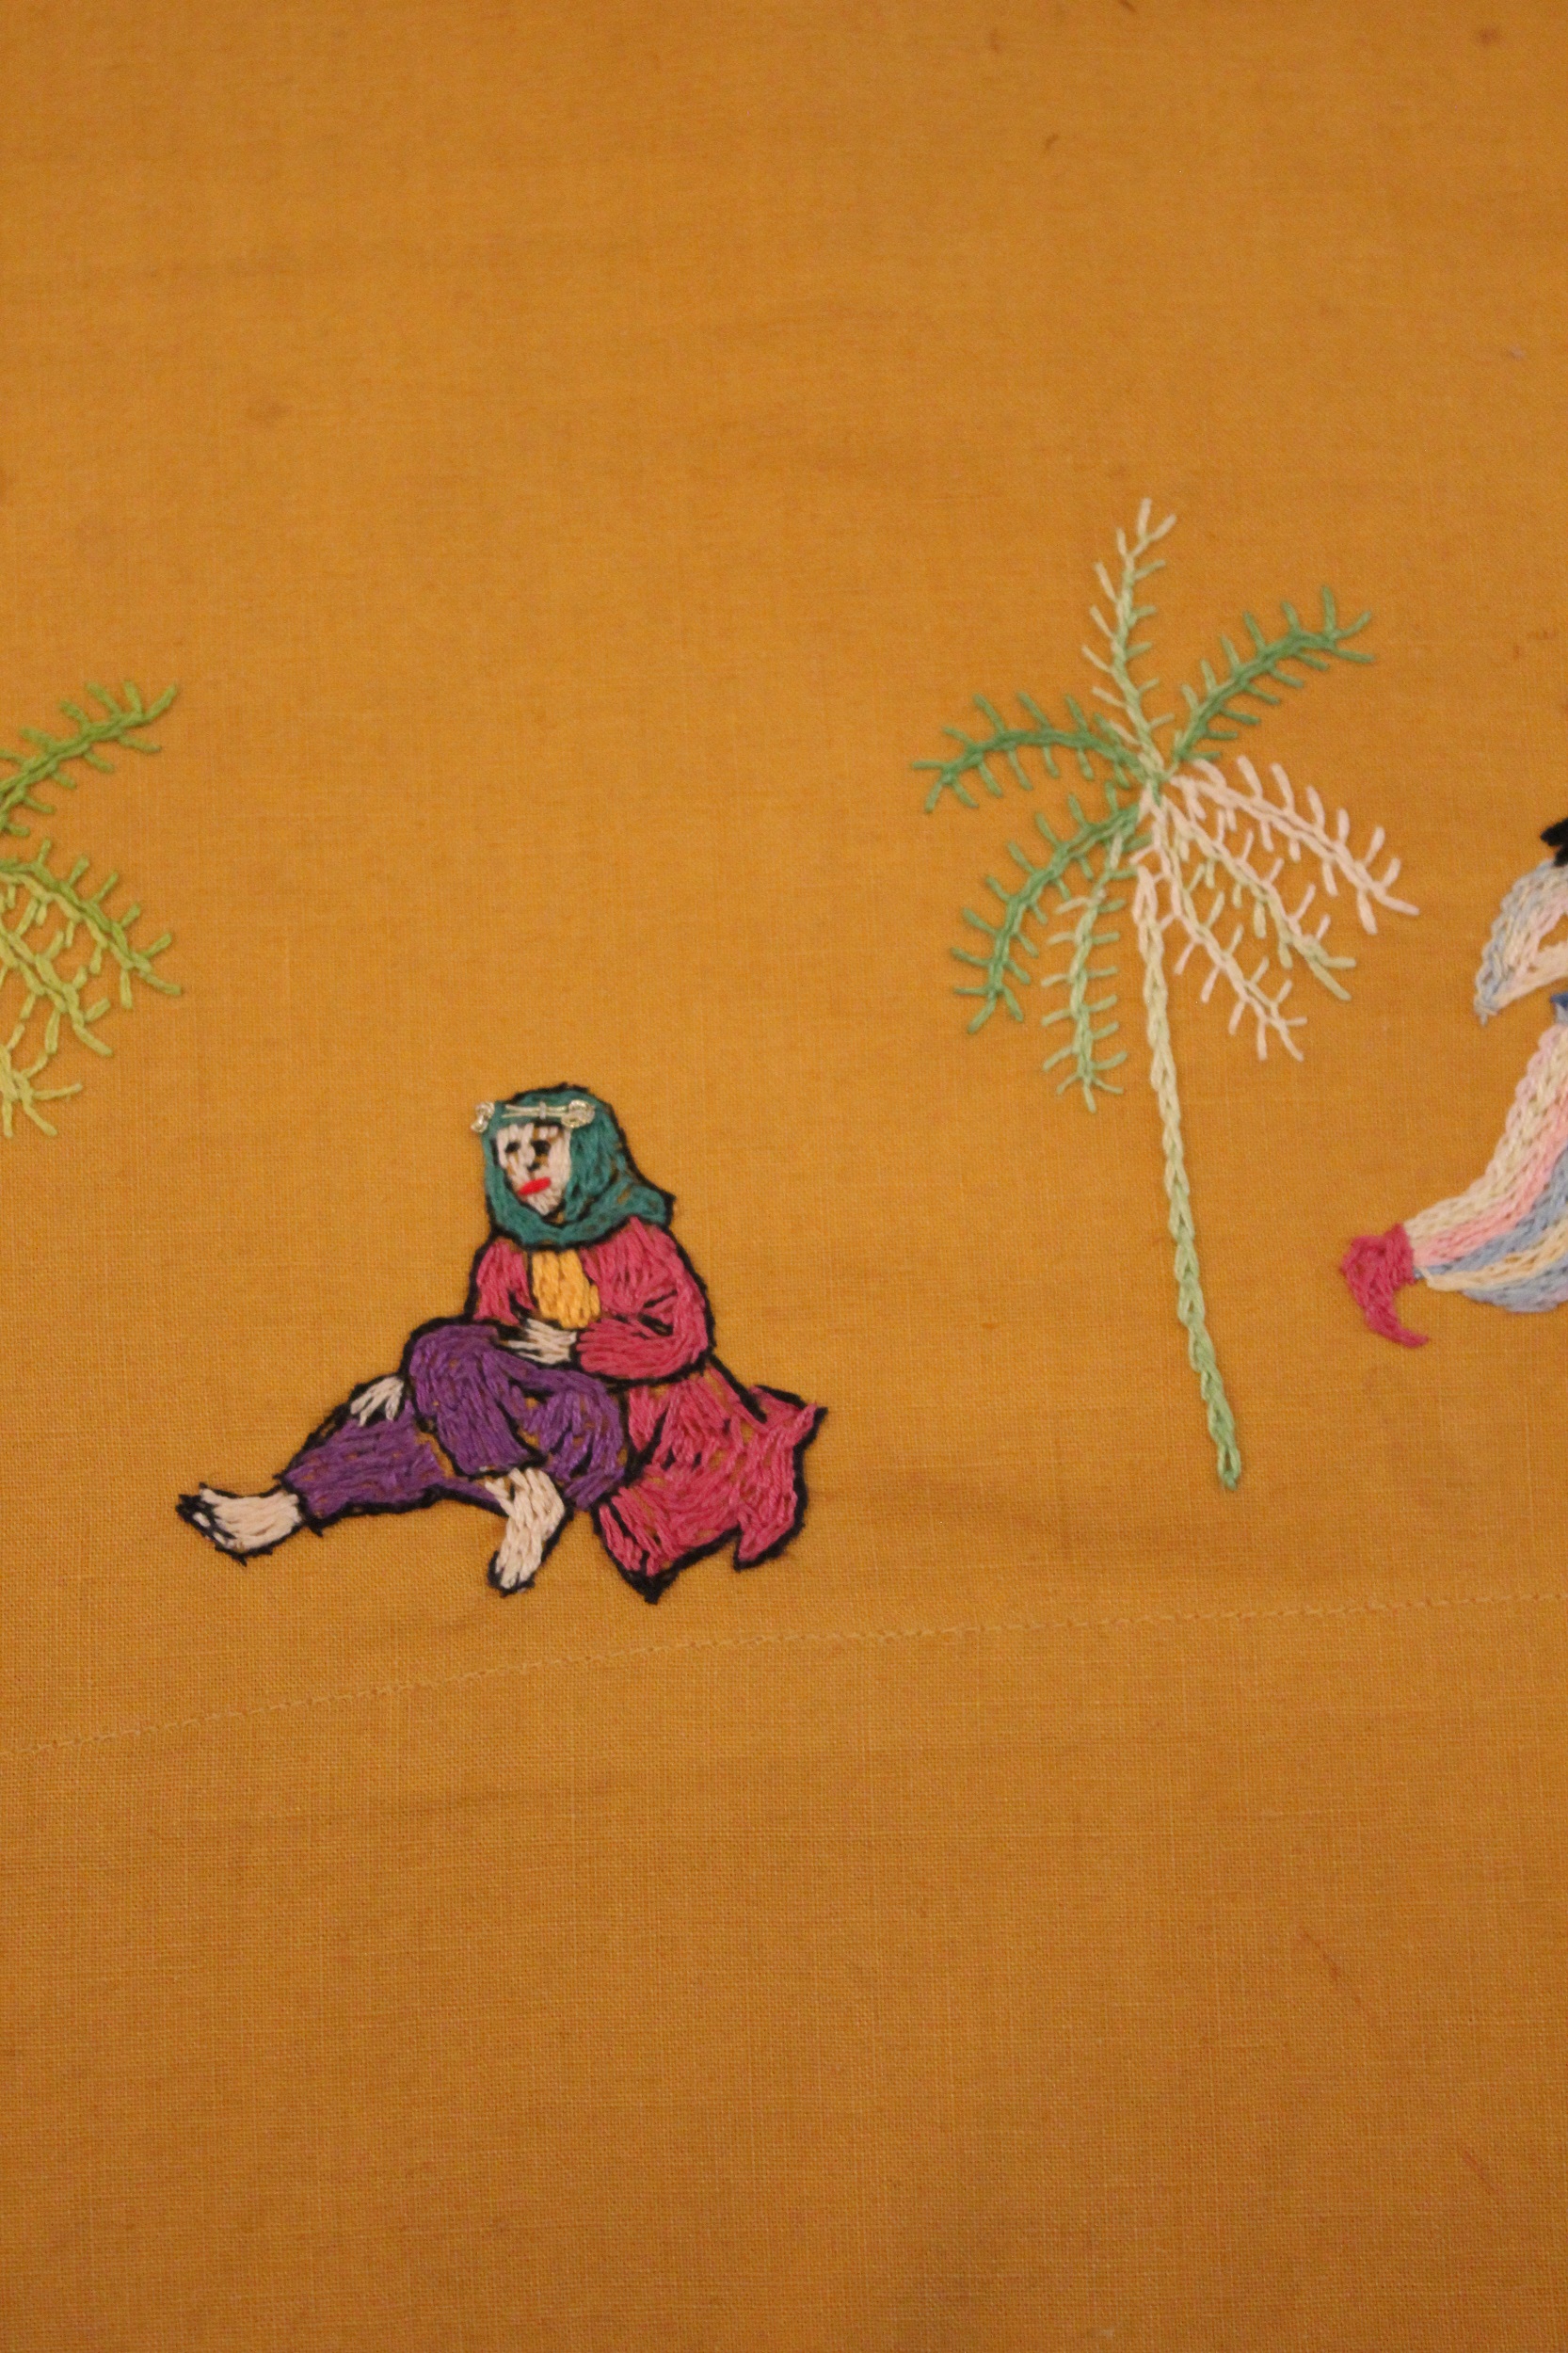 Embroidered depiction of a figure in purple pants, a red coat, and a green headscarf sitting on the ground, between two palm trees